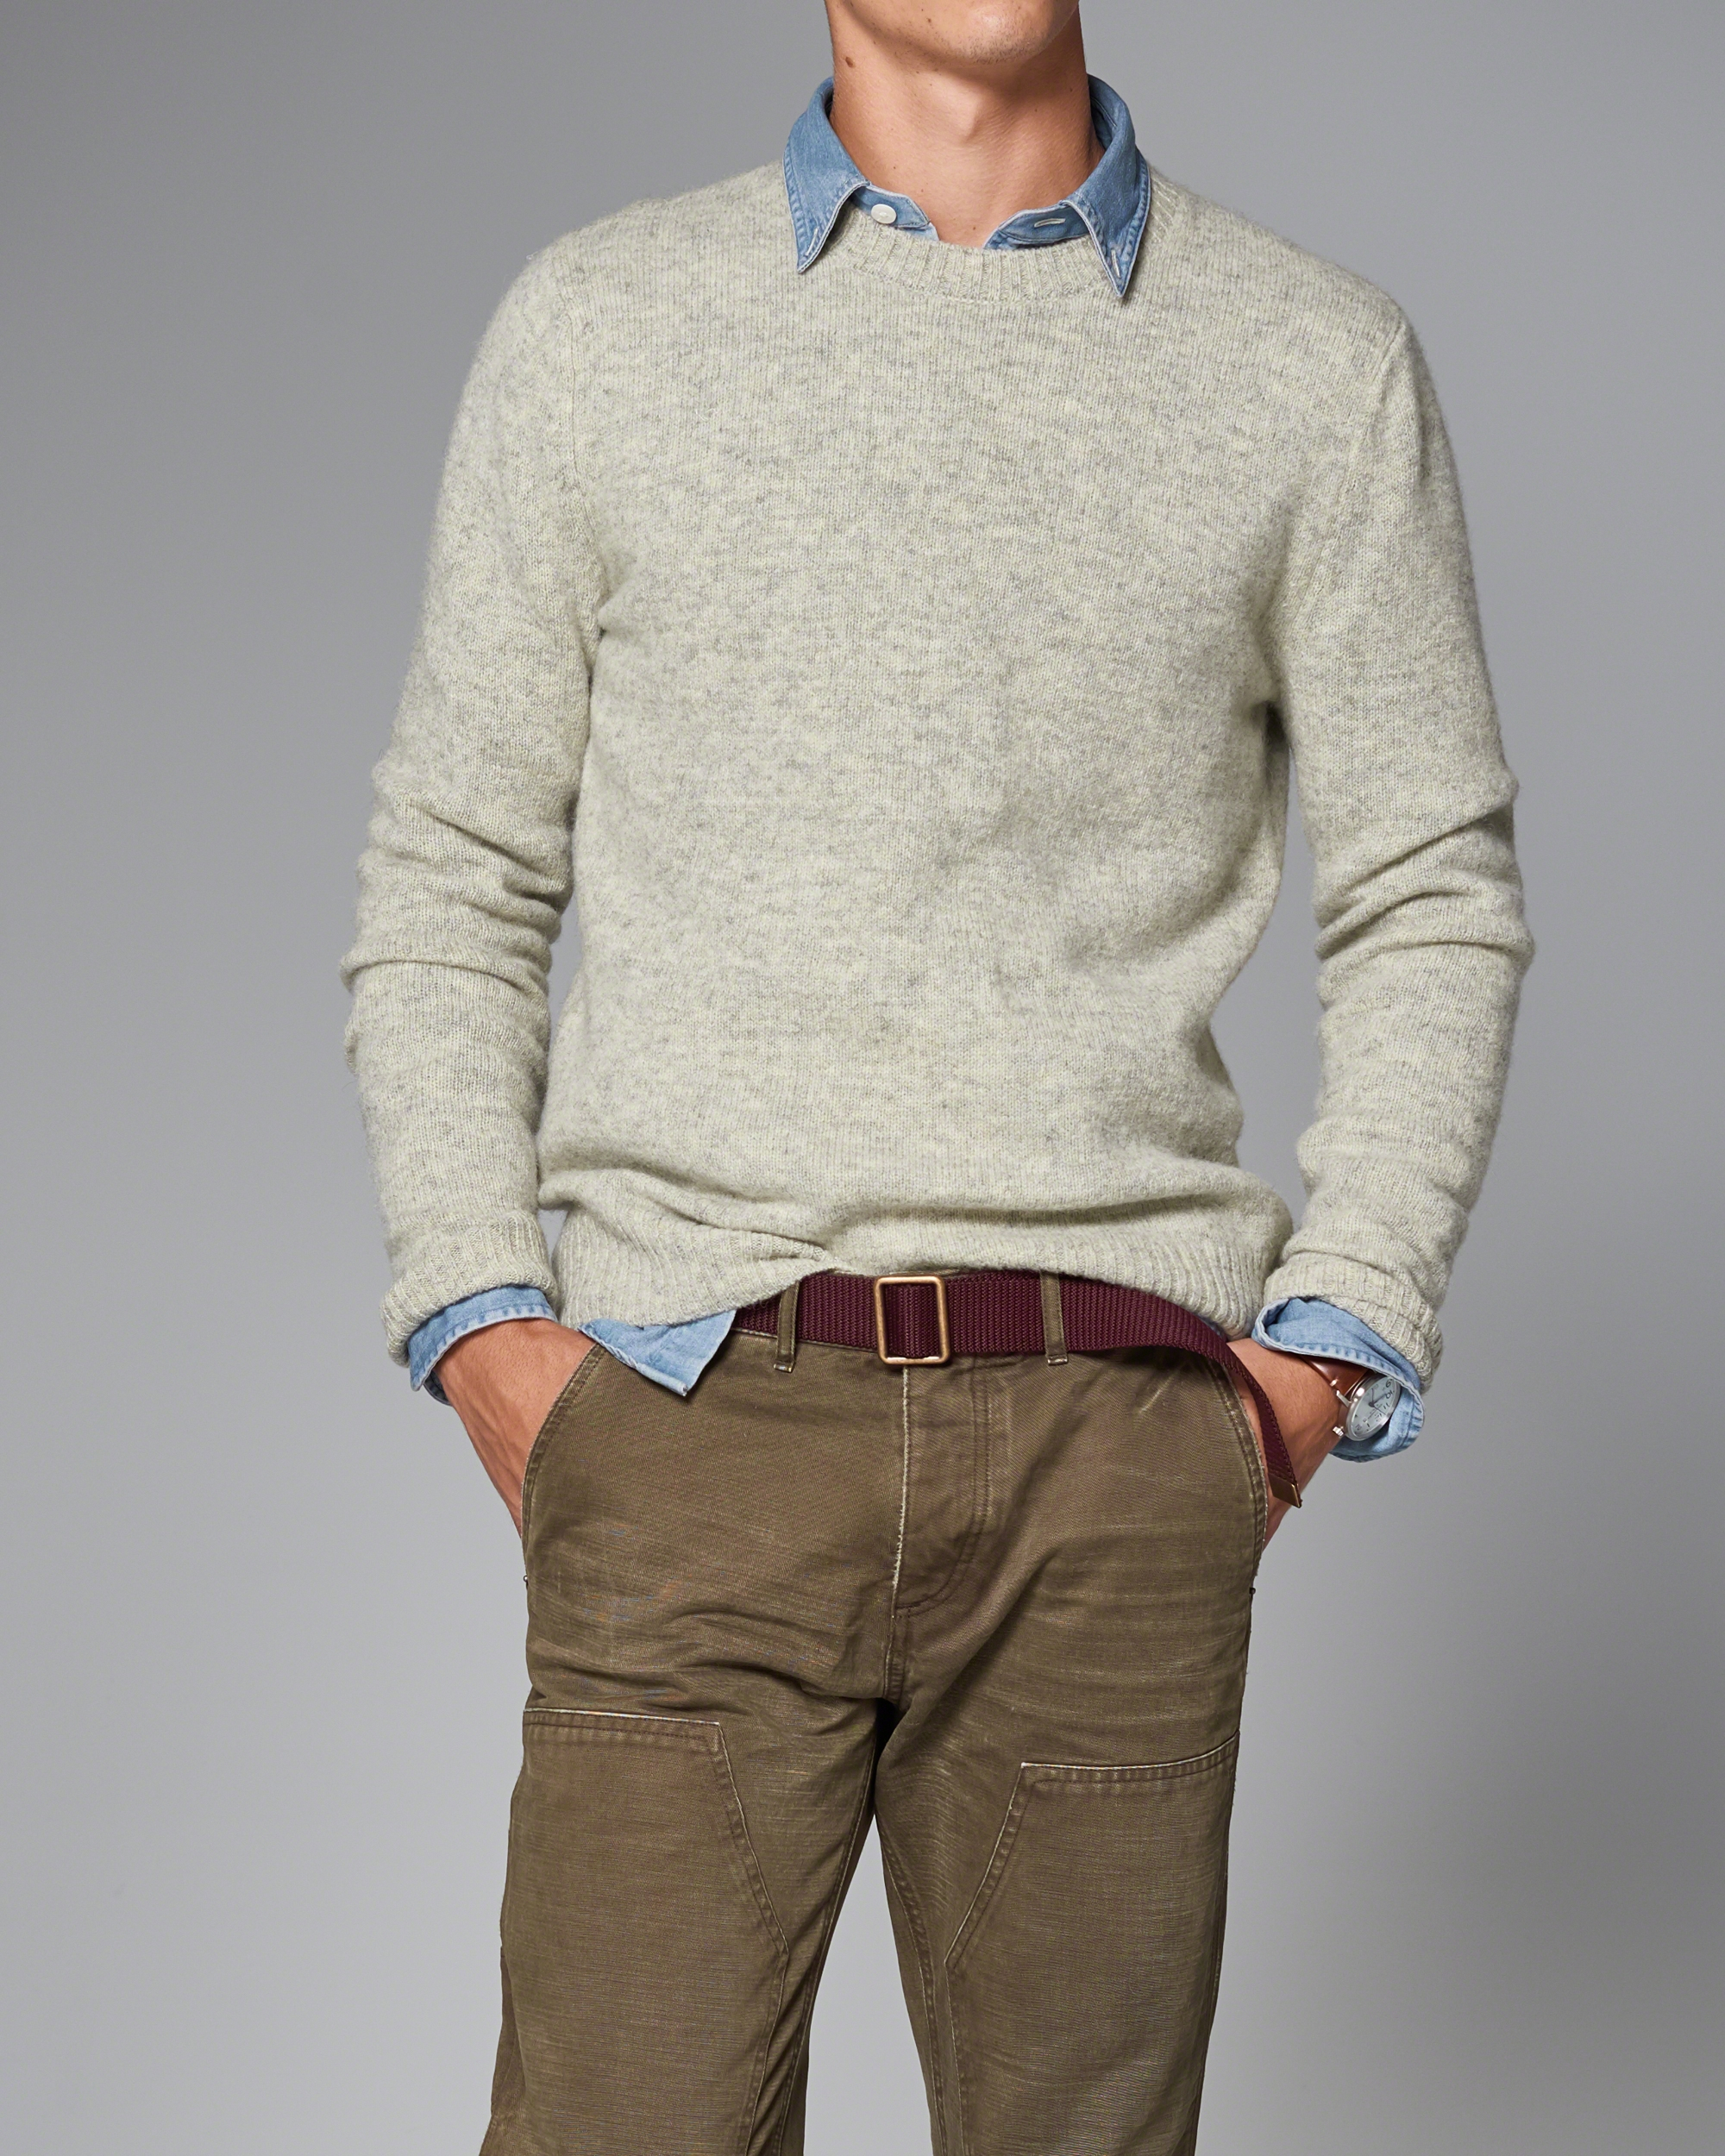 Lyst - Abercrombie & fitch Wool Crew Sweater in Gray for Men